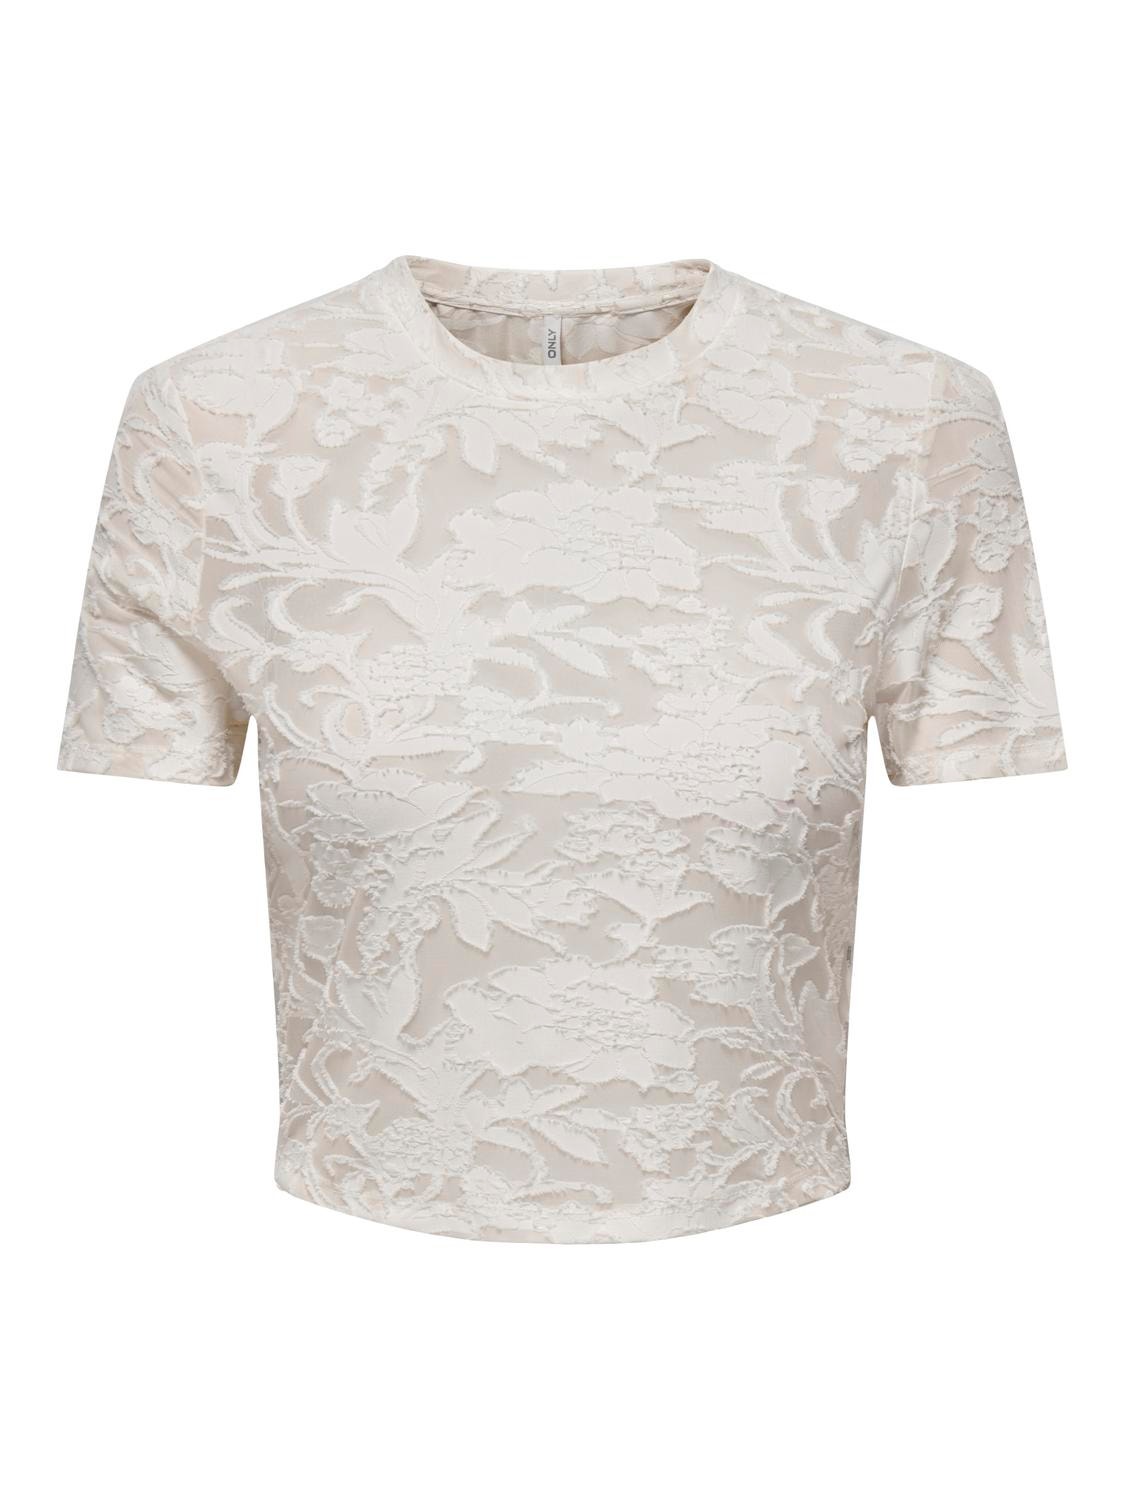 ONLY Cropped Patterned T-shirt -Cloud Dancer - 15289737